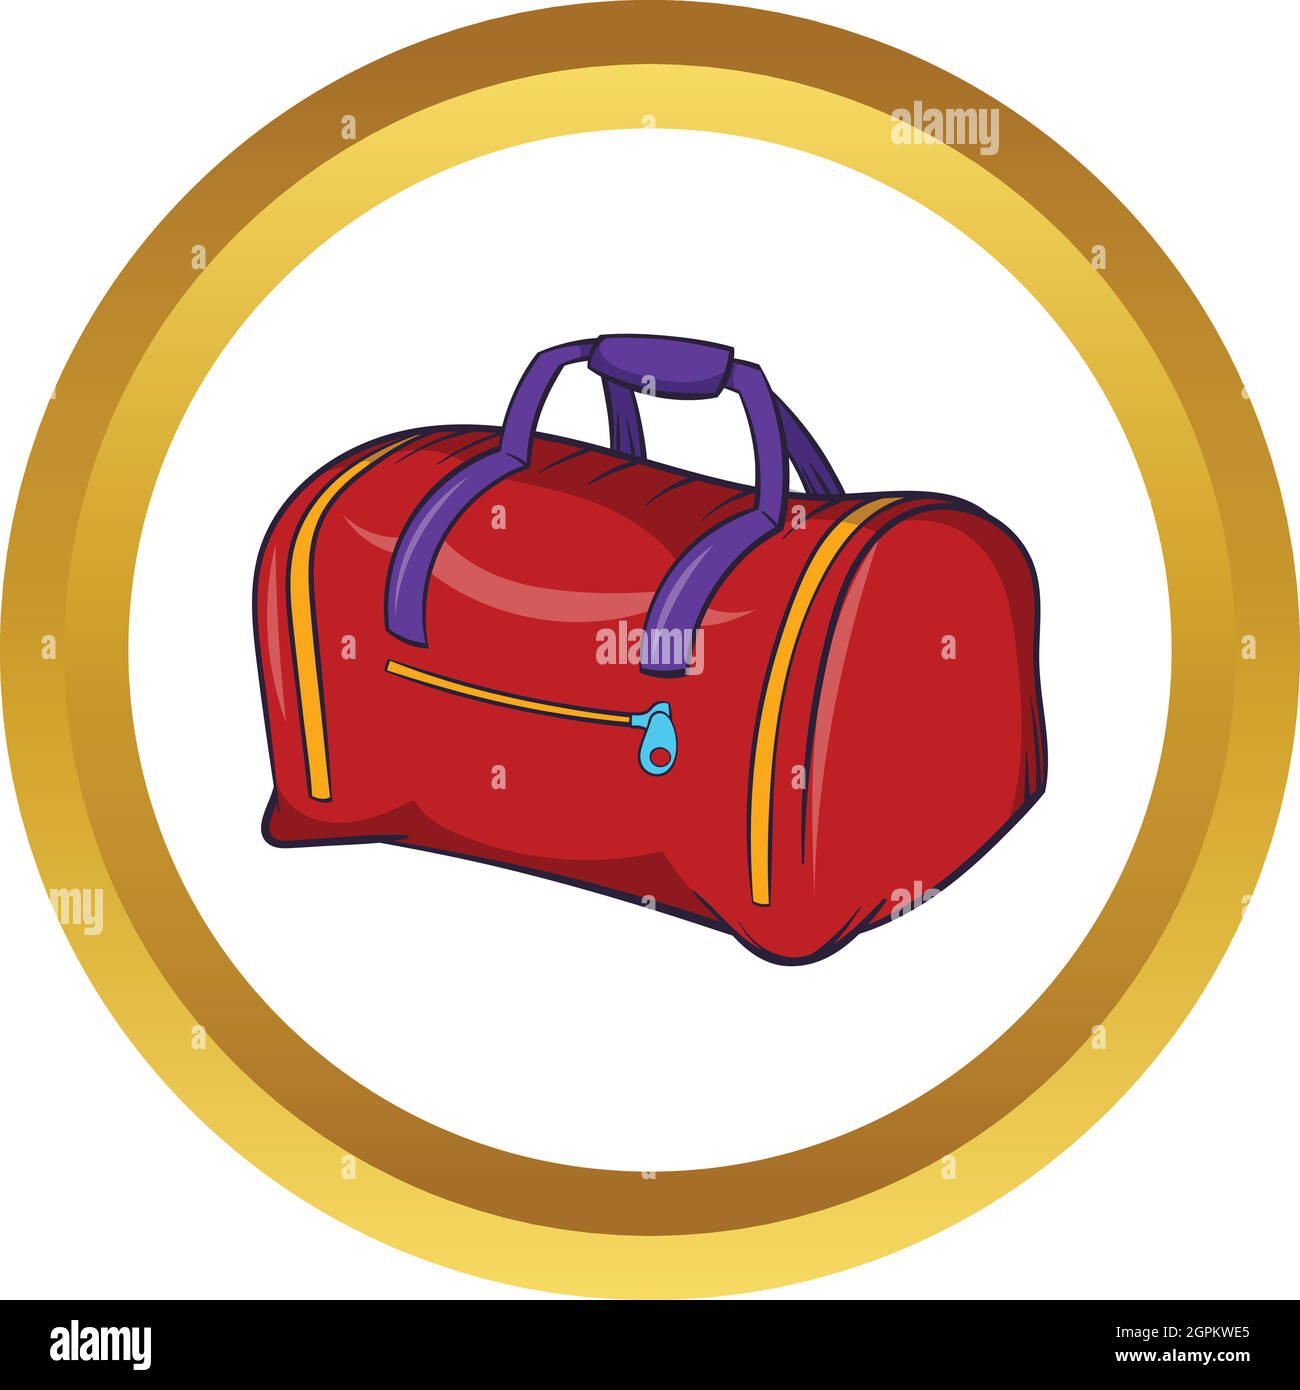 Red travel suitcase Royalty Free Vector Image - VectorStock